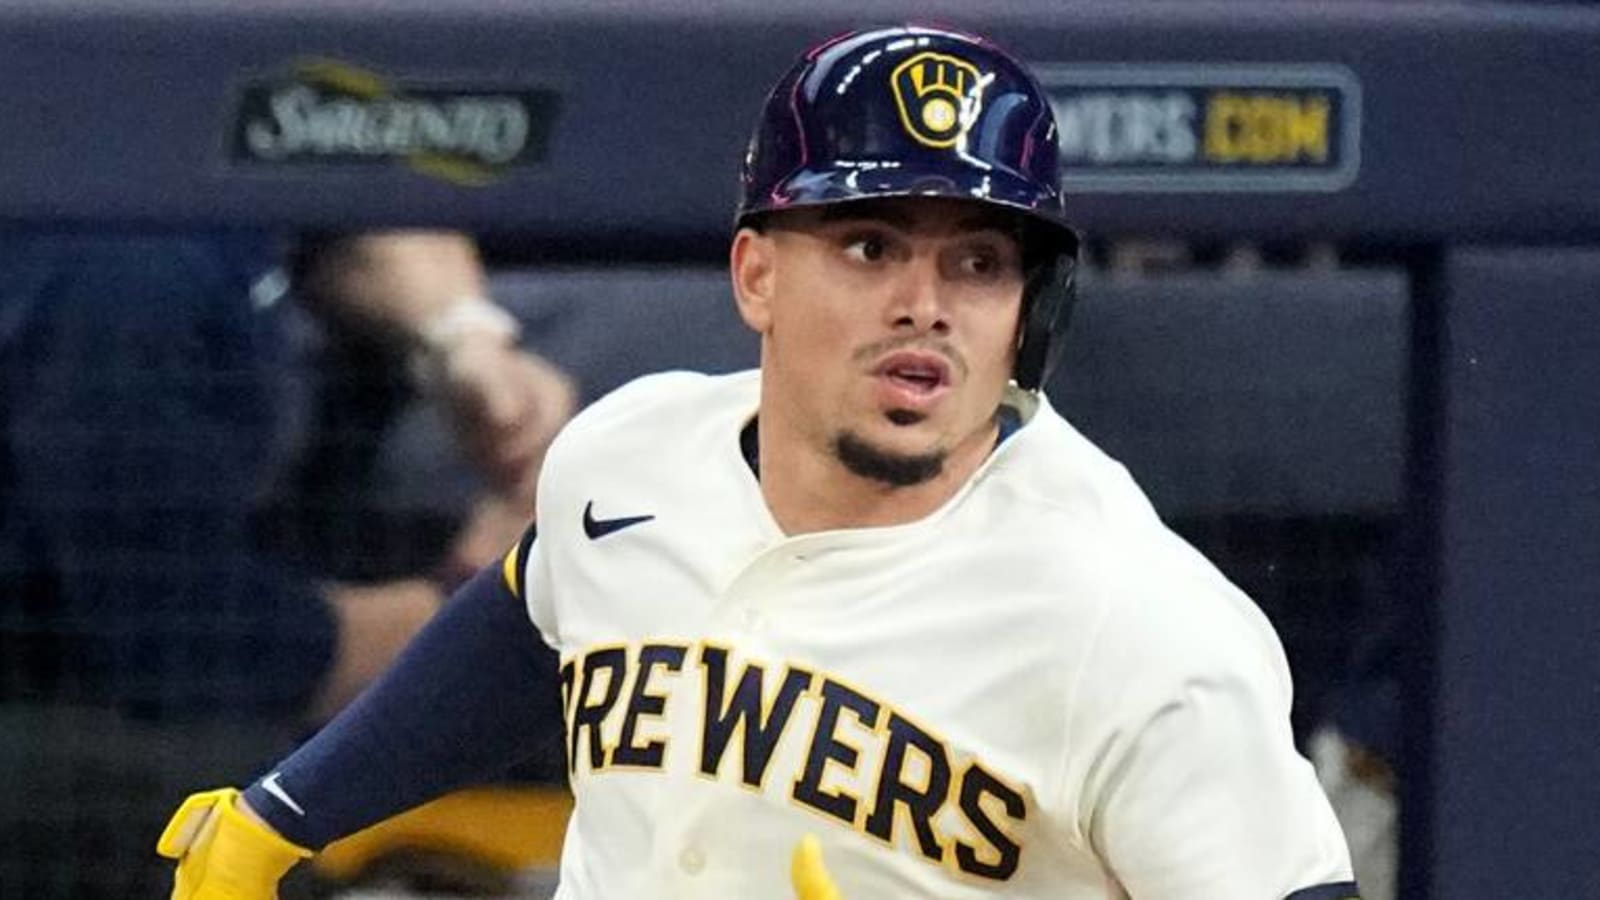 Doctor told Brewers SS that accident could've been worse